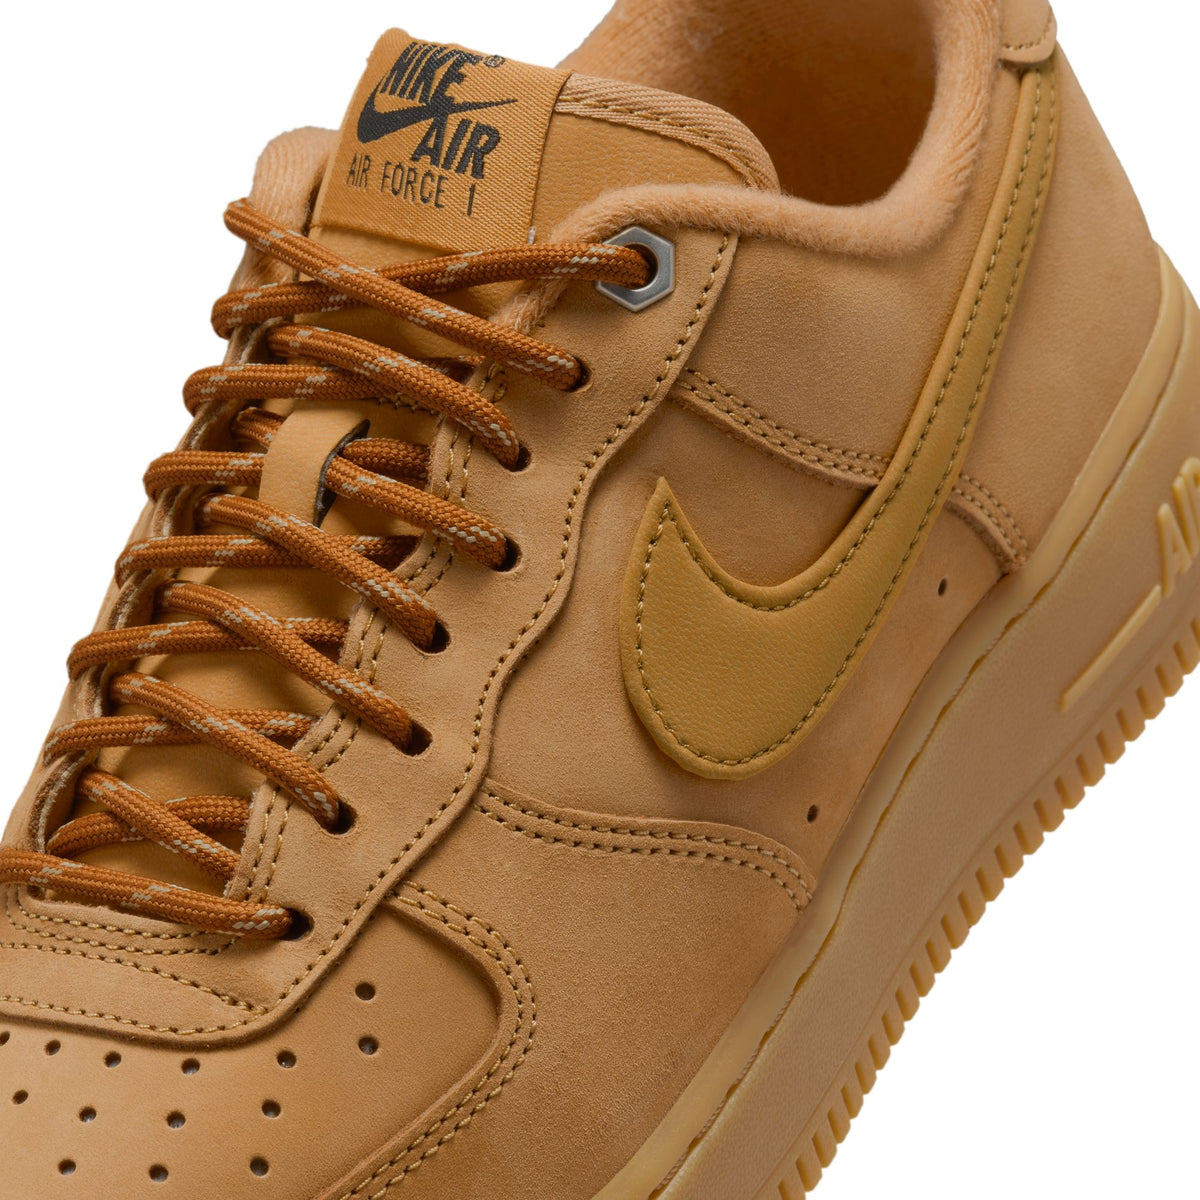 WMNS Nike Air Force 1 Low '07 "Flax Wheat"